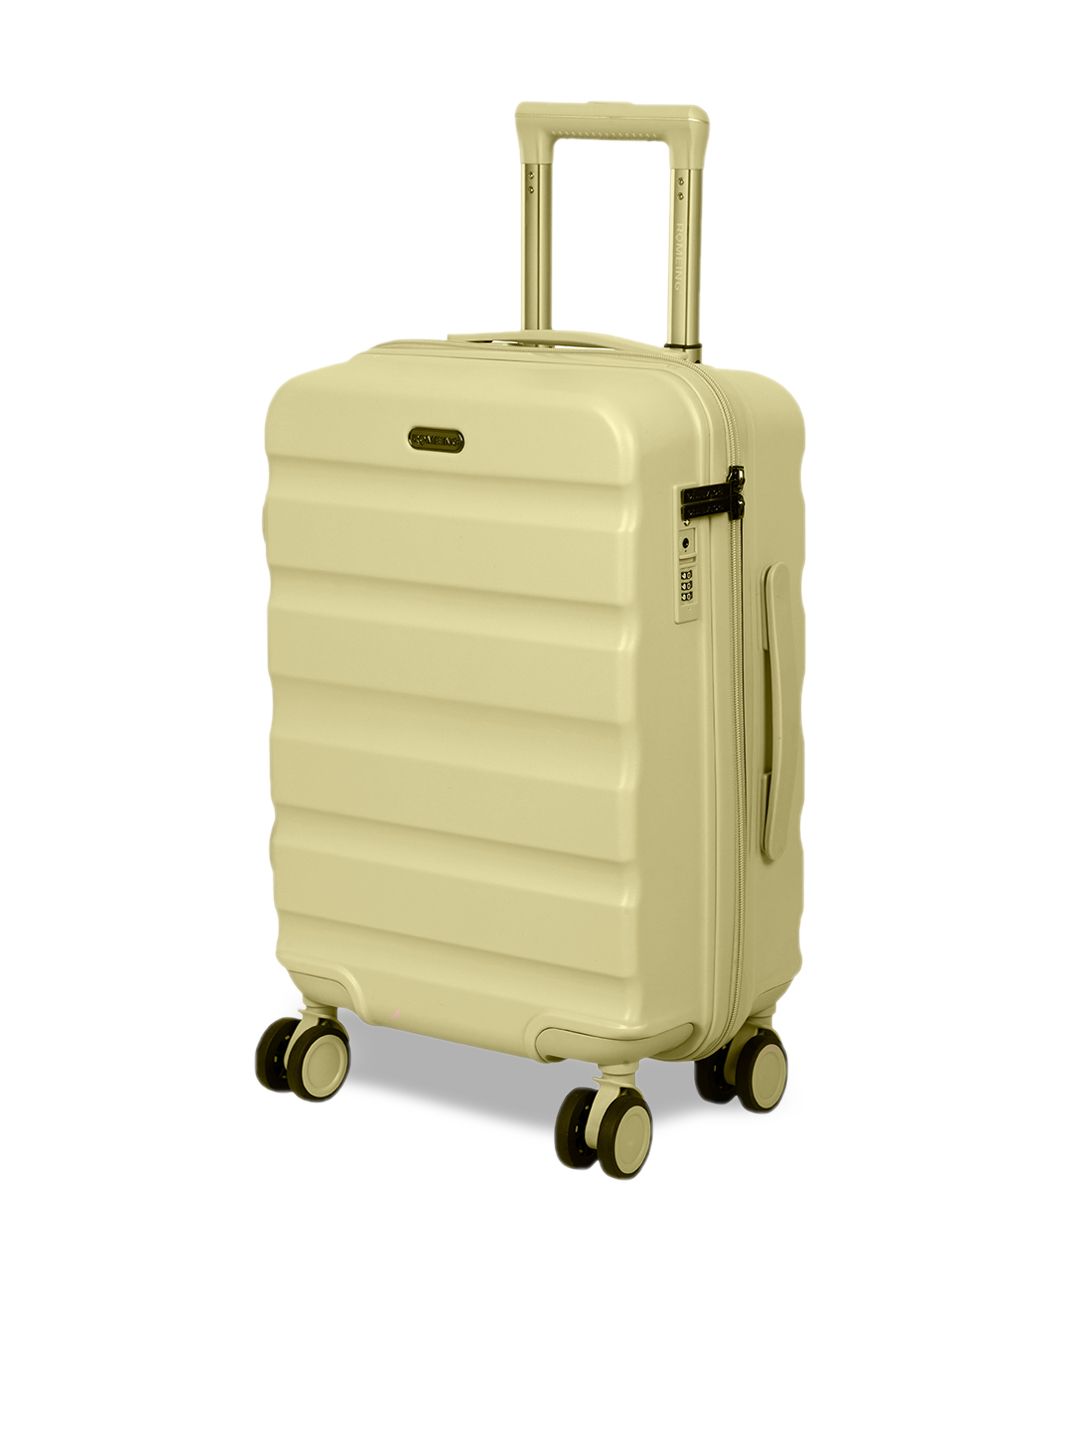 ROMEING Venice Yellow Textured Hard-Sided Polycarbonate Cabin Trolley Suitcase Price in India